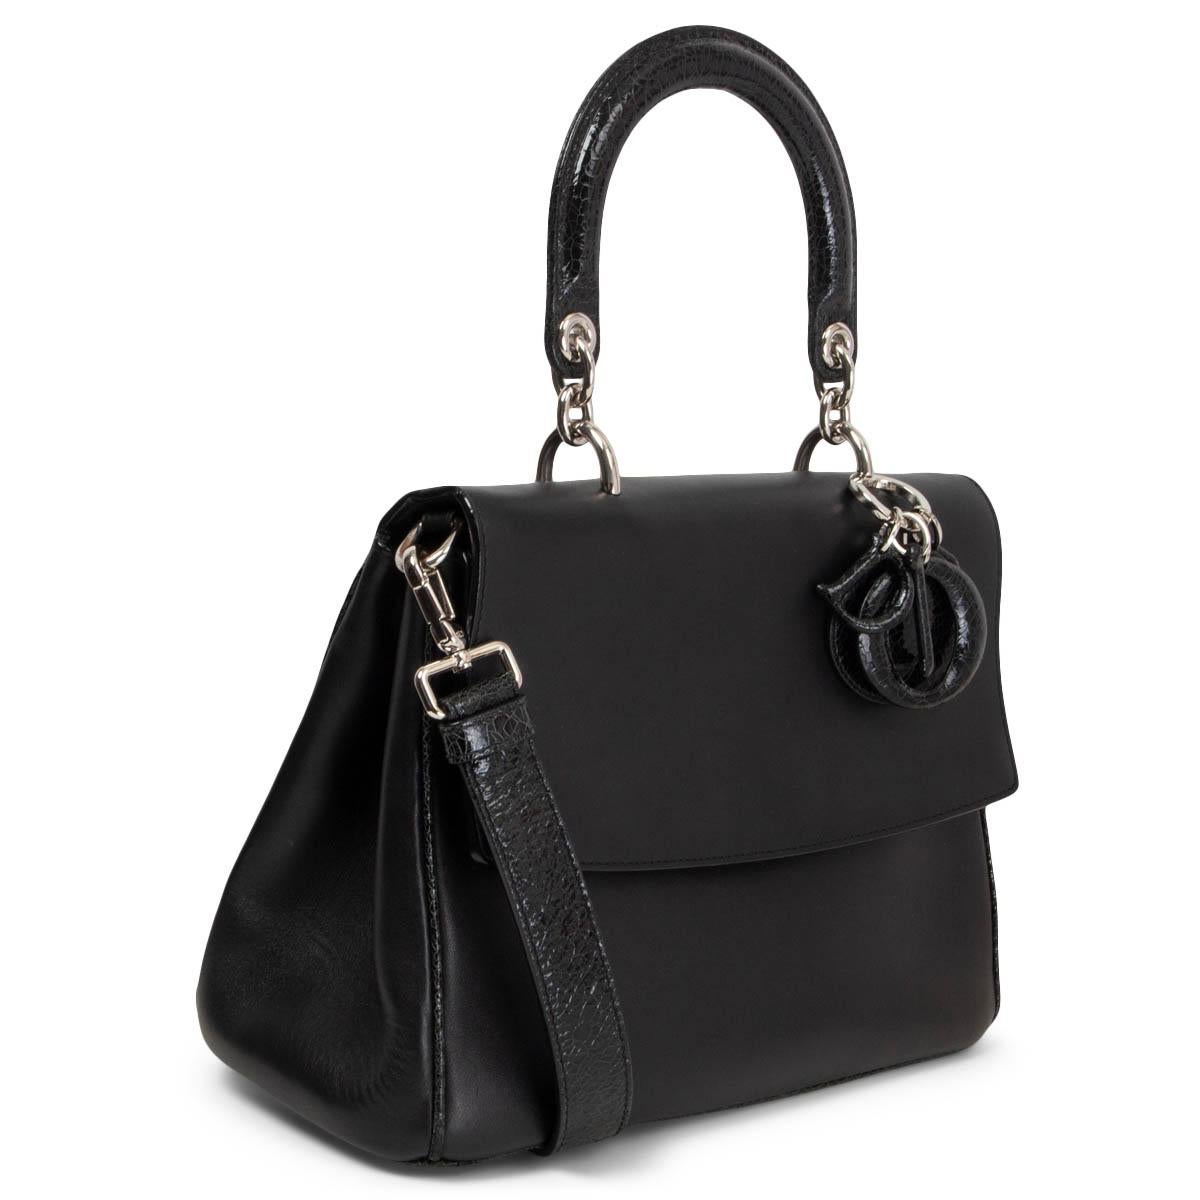 100% authentic Christian Dior Be Dior with in black smooth calfskin featuring silver-tone hardware and crinkled patent leather top handle, back pocket, shoulder-strap and covered metal DIOR charms. Bag comes with a removable long strap an easy-open